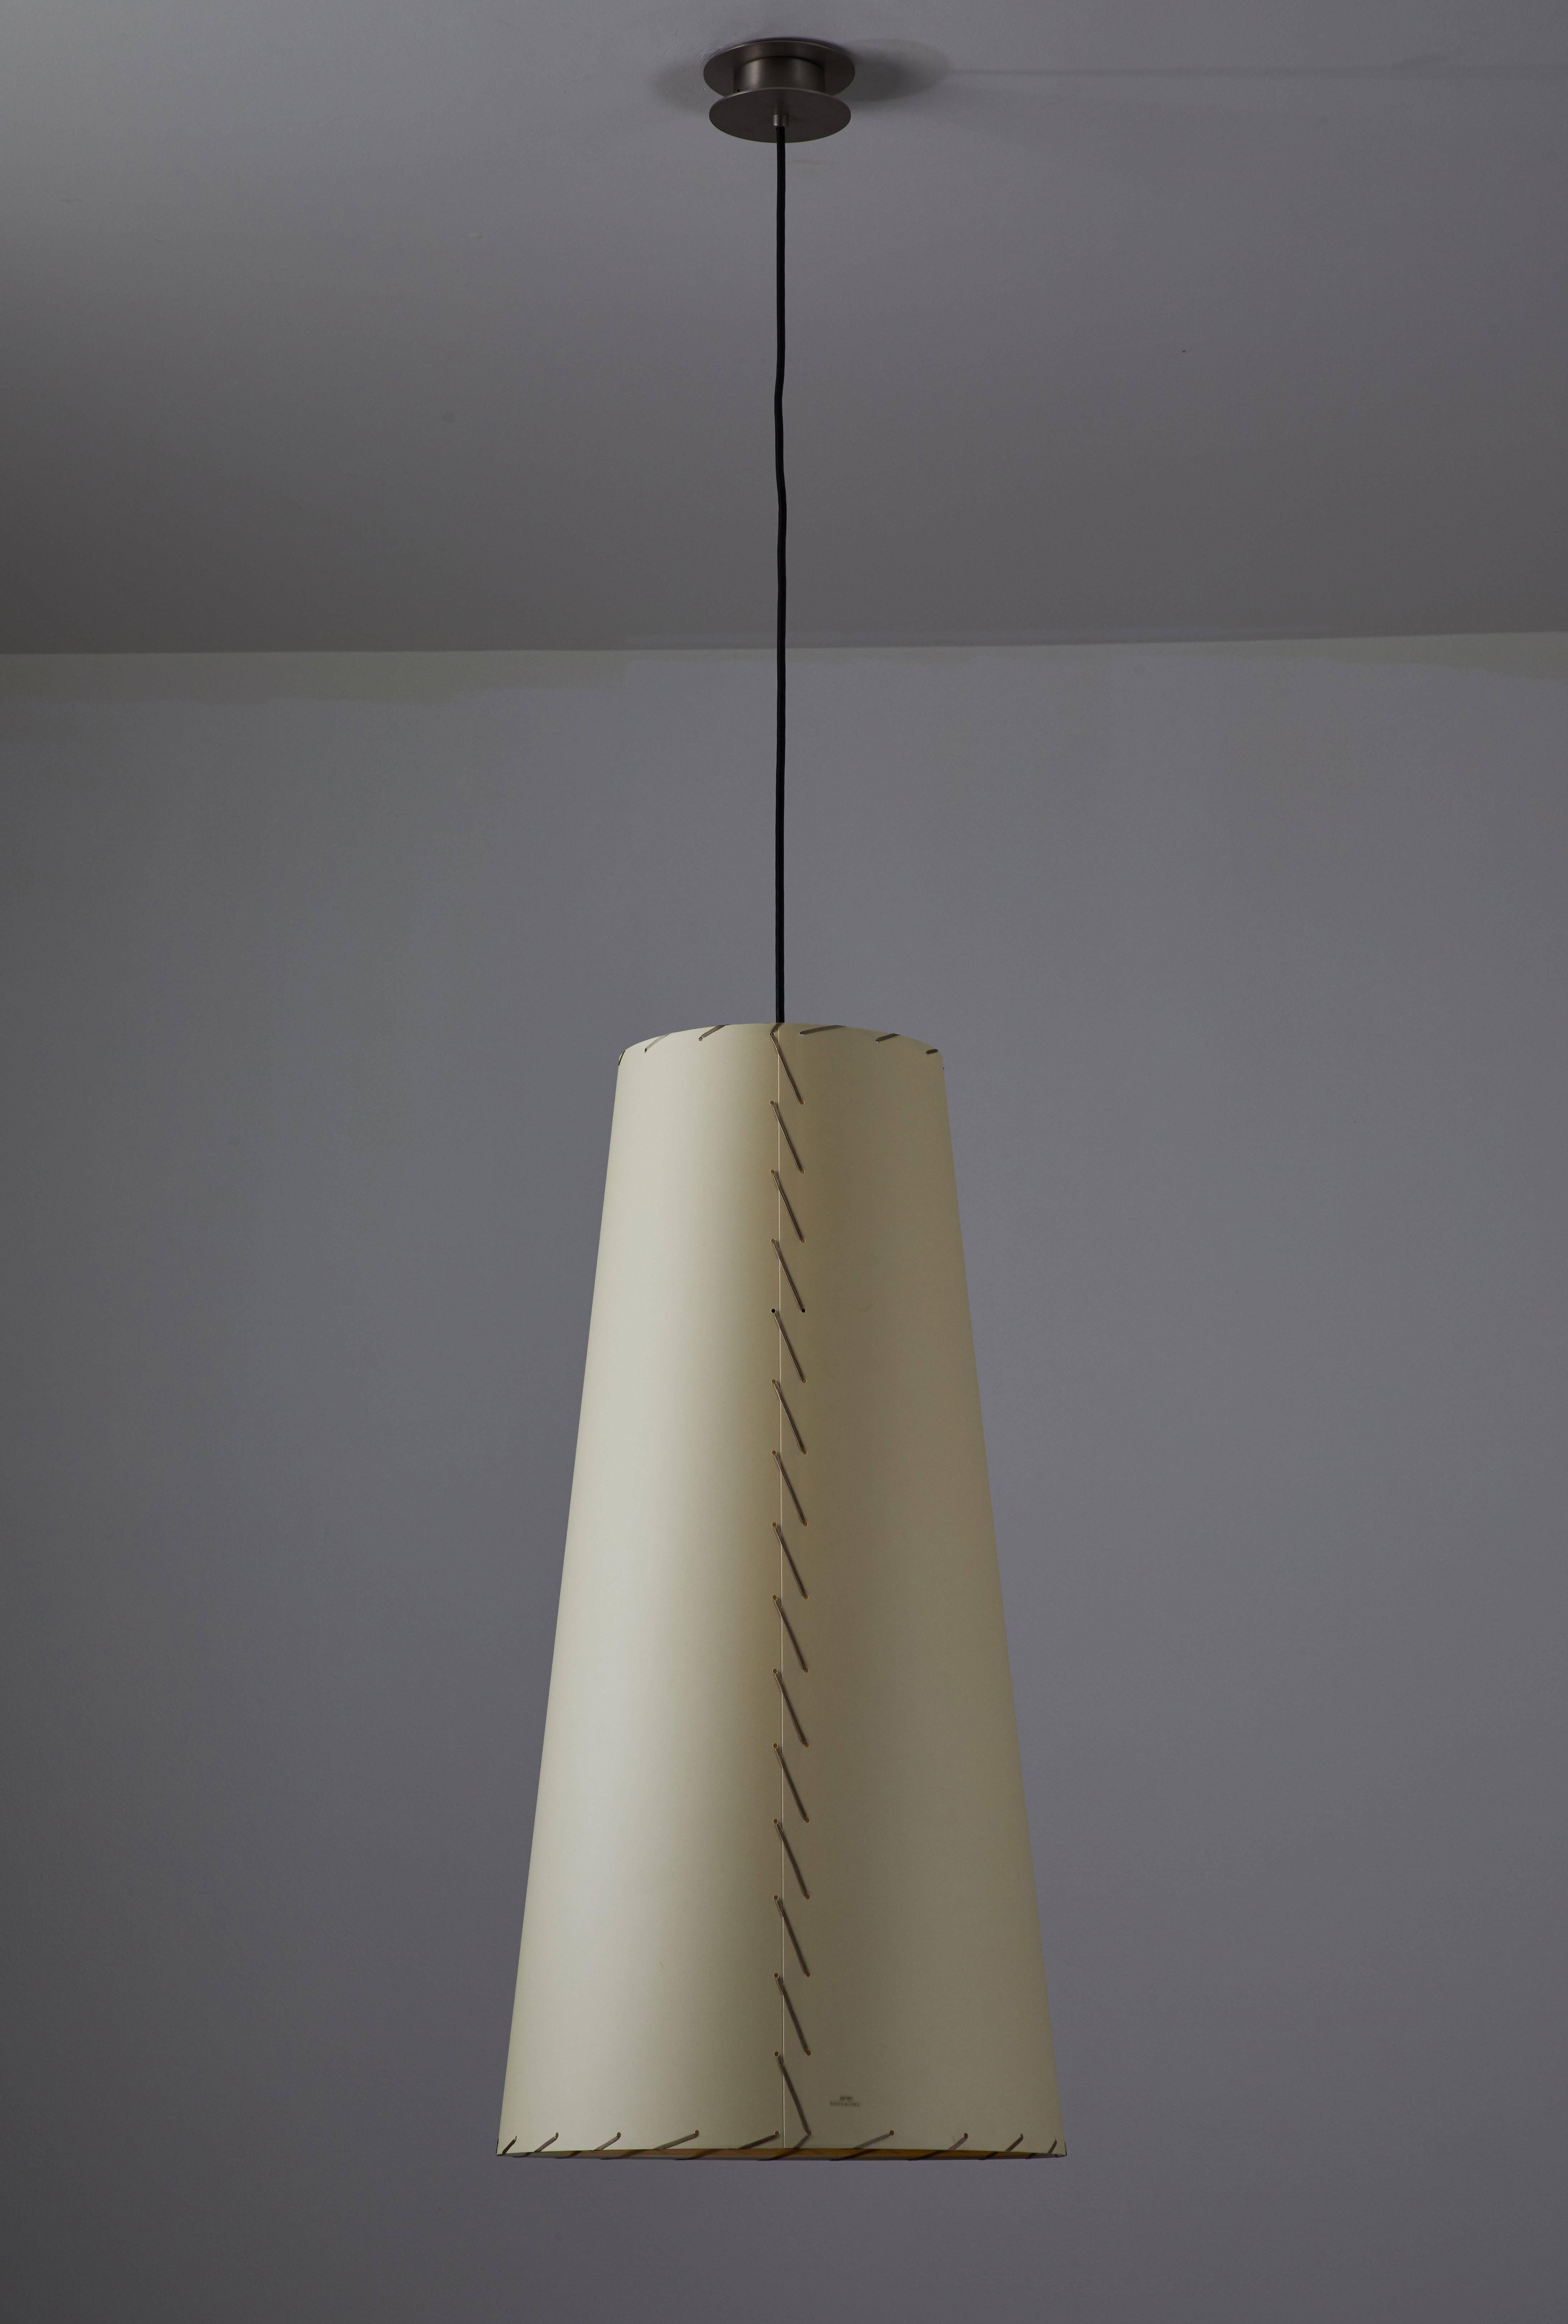 Spanish GT4 Pendant Lamp by Gabriel Ordeig Cole for Santa and Cole